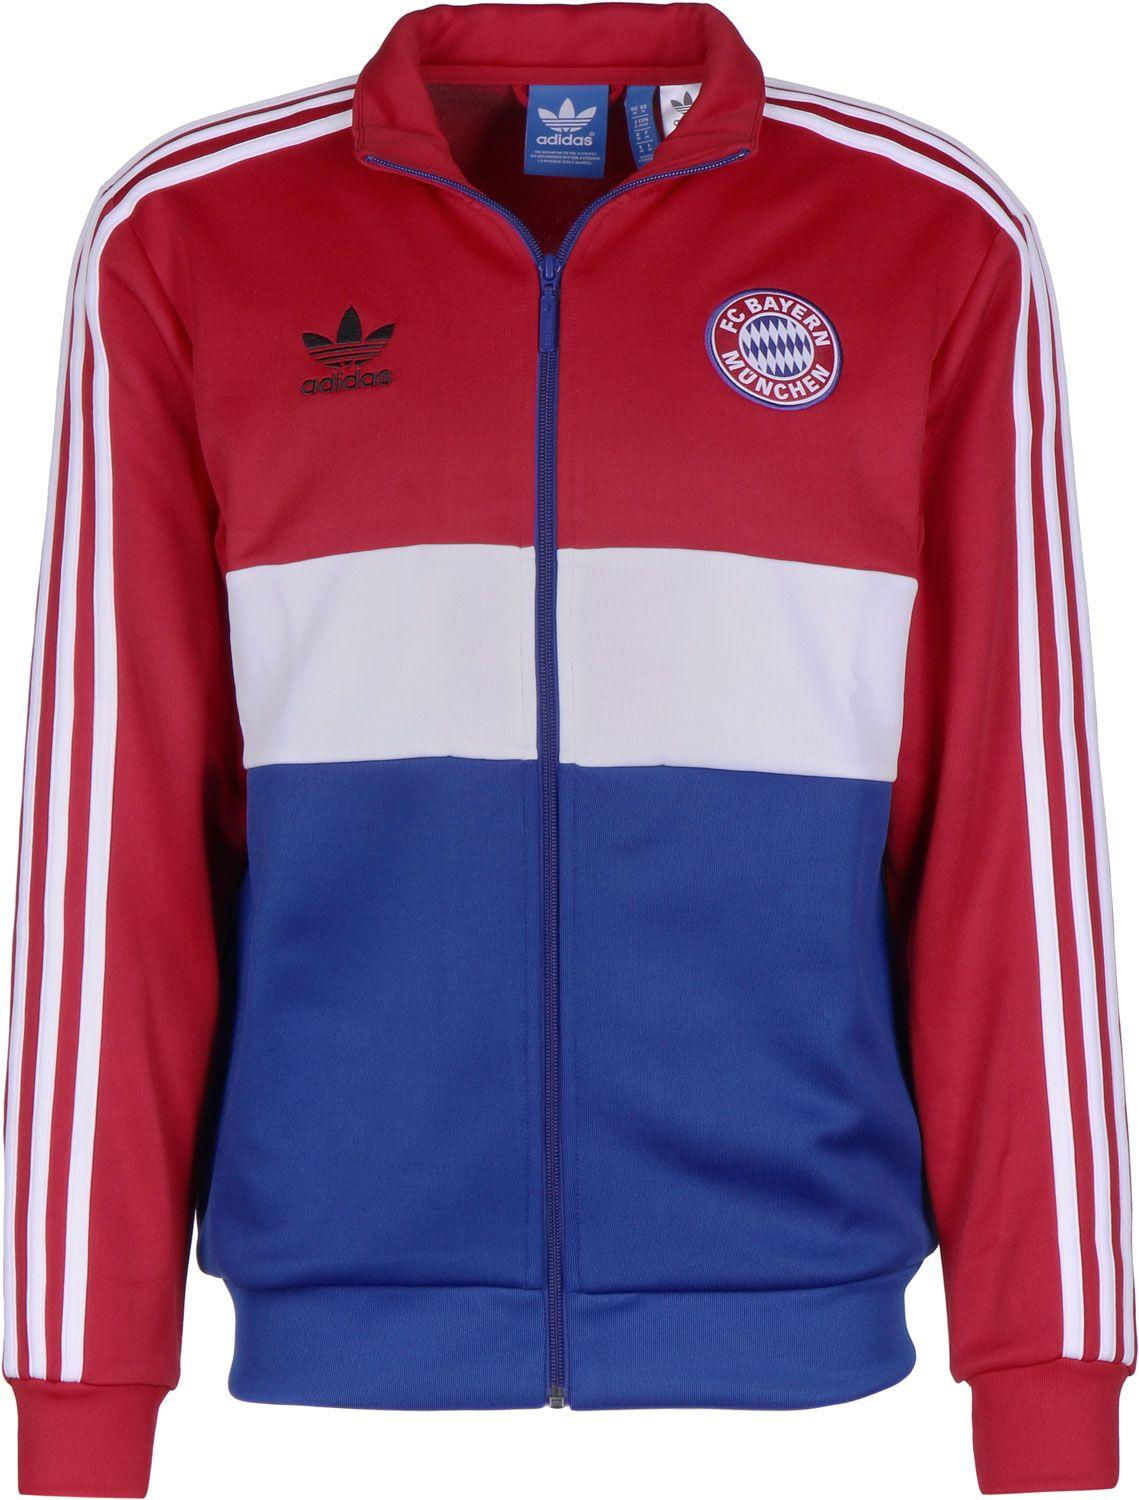 Red and White TT Logo - adidas clothing Adidas Bayern Tt Track Top White Blue Tops